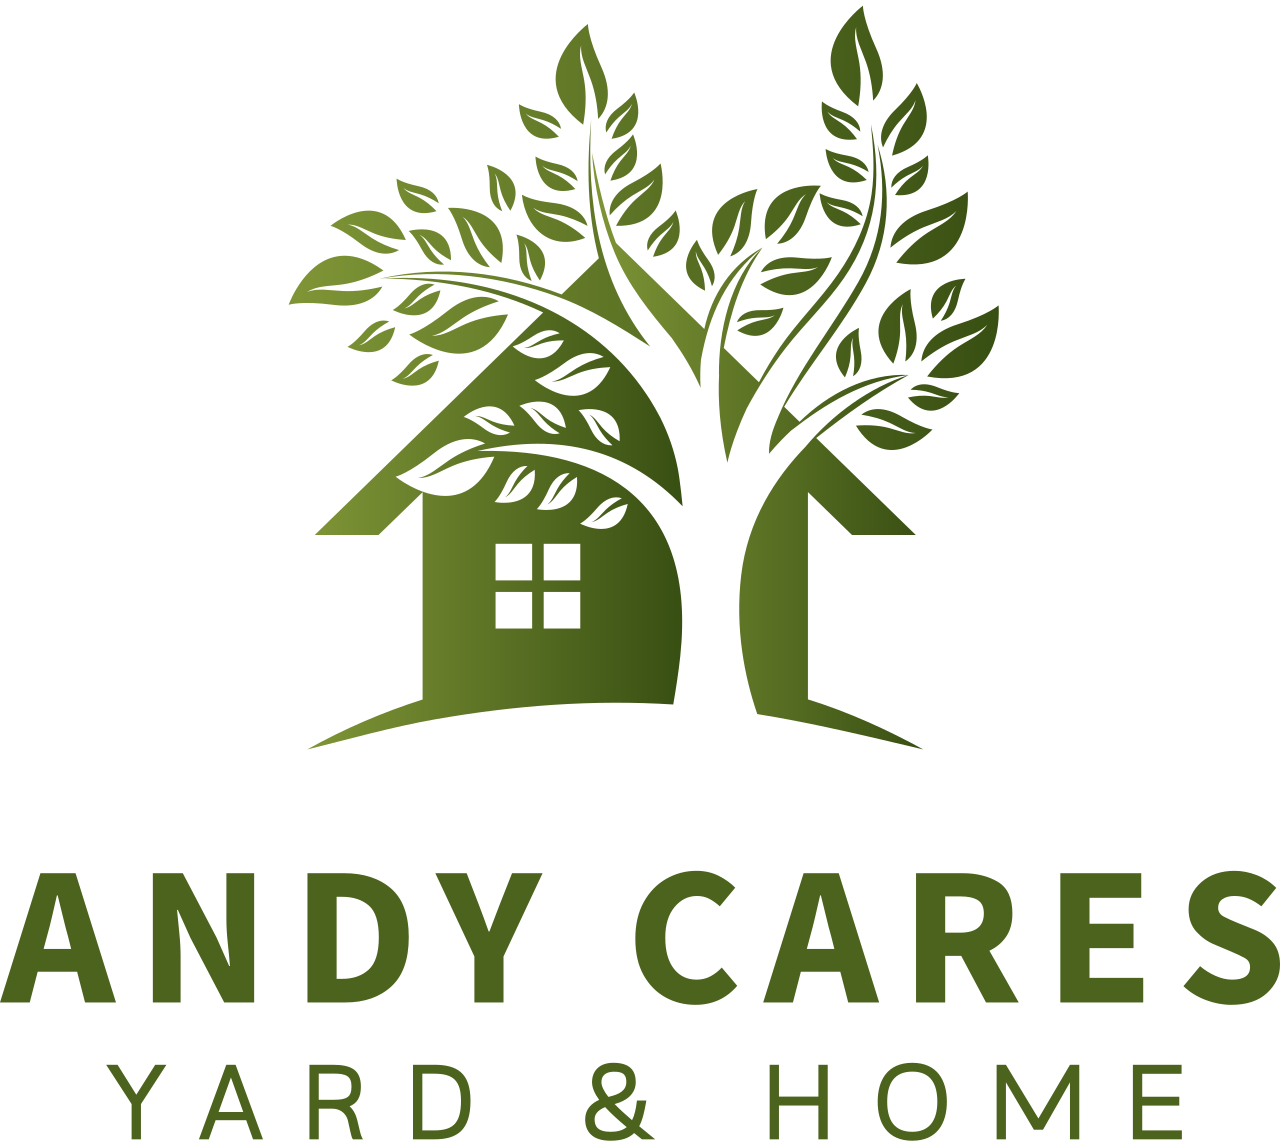 ANDY CARES's web page